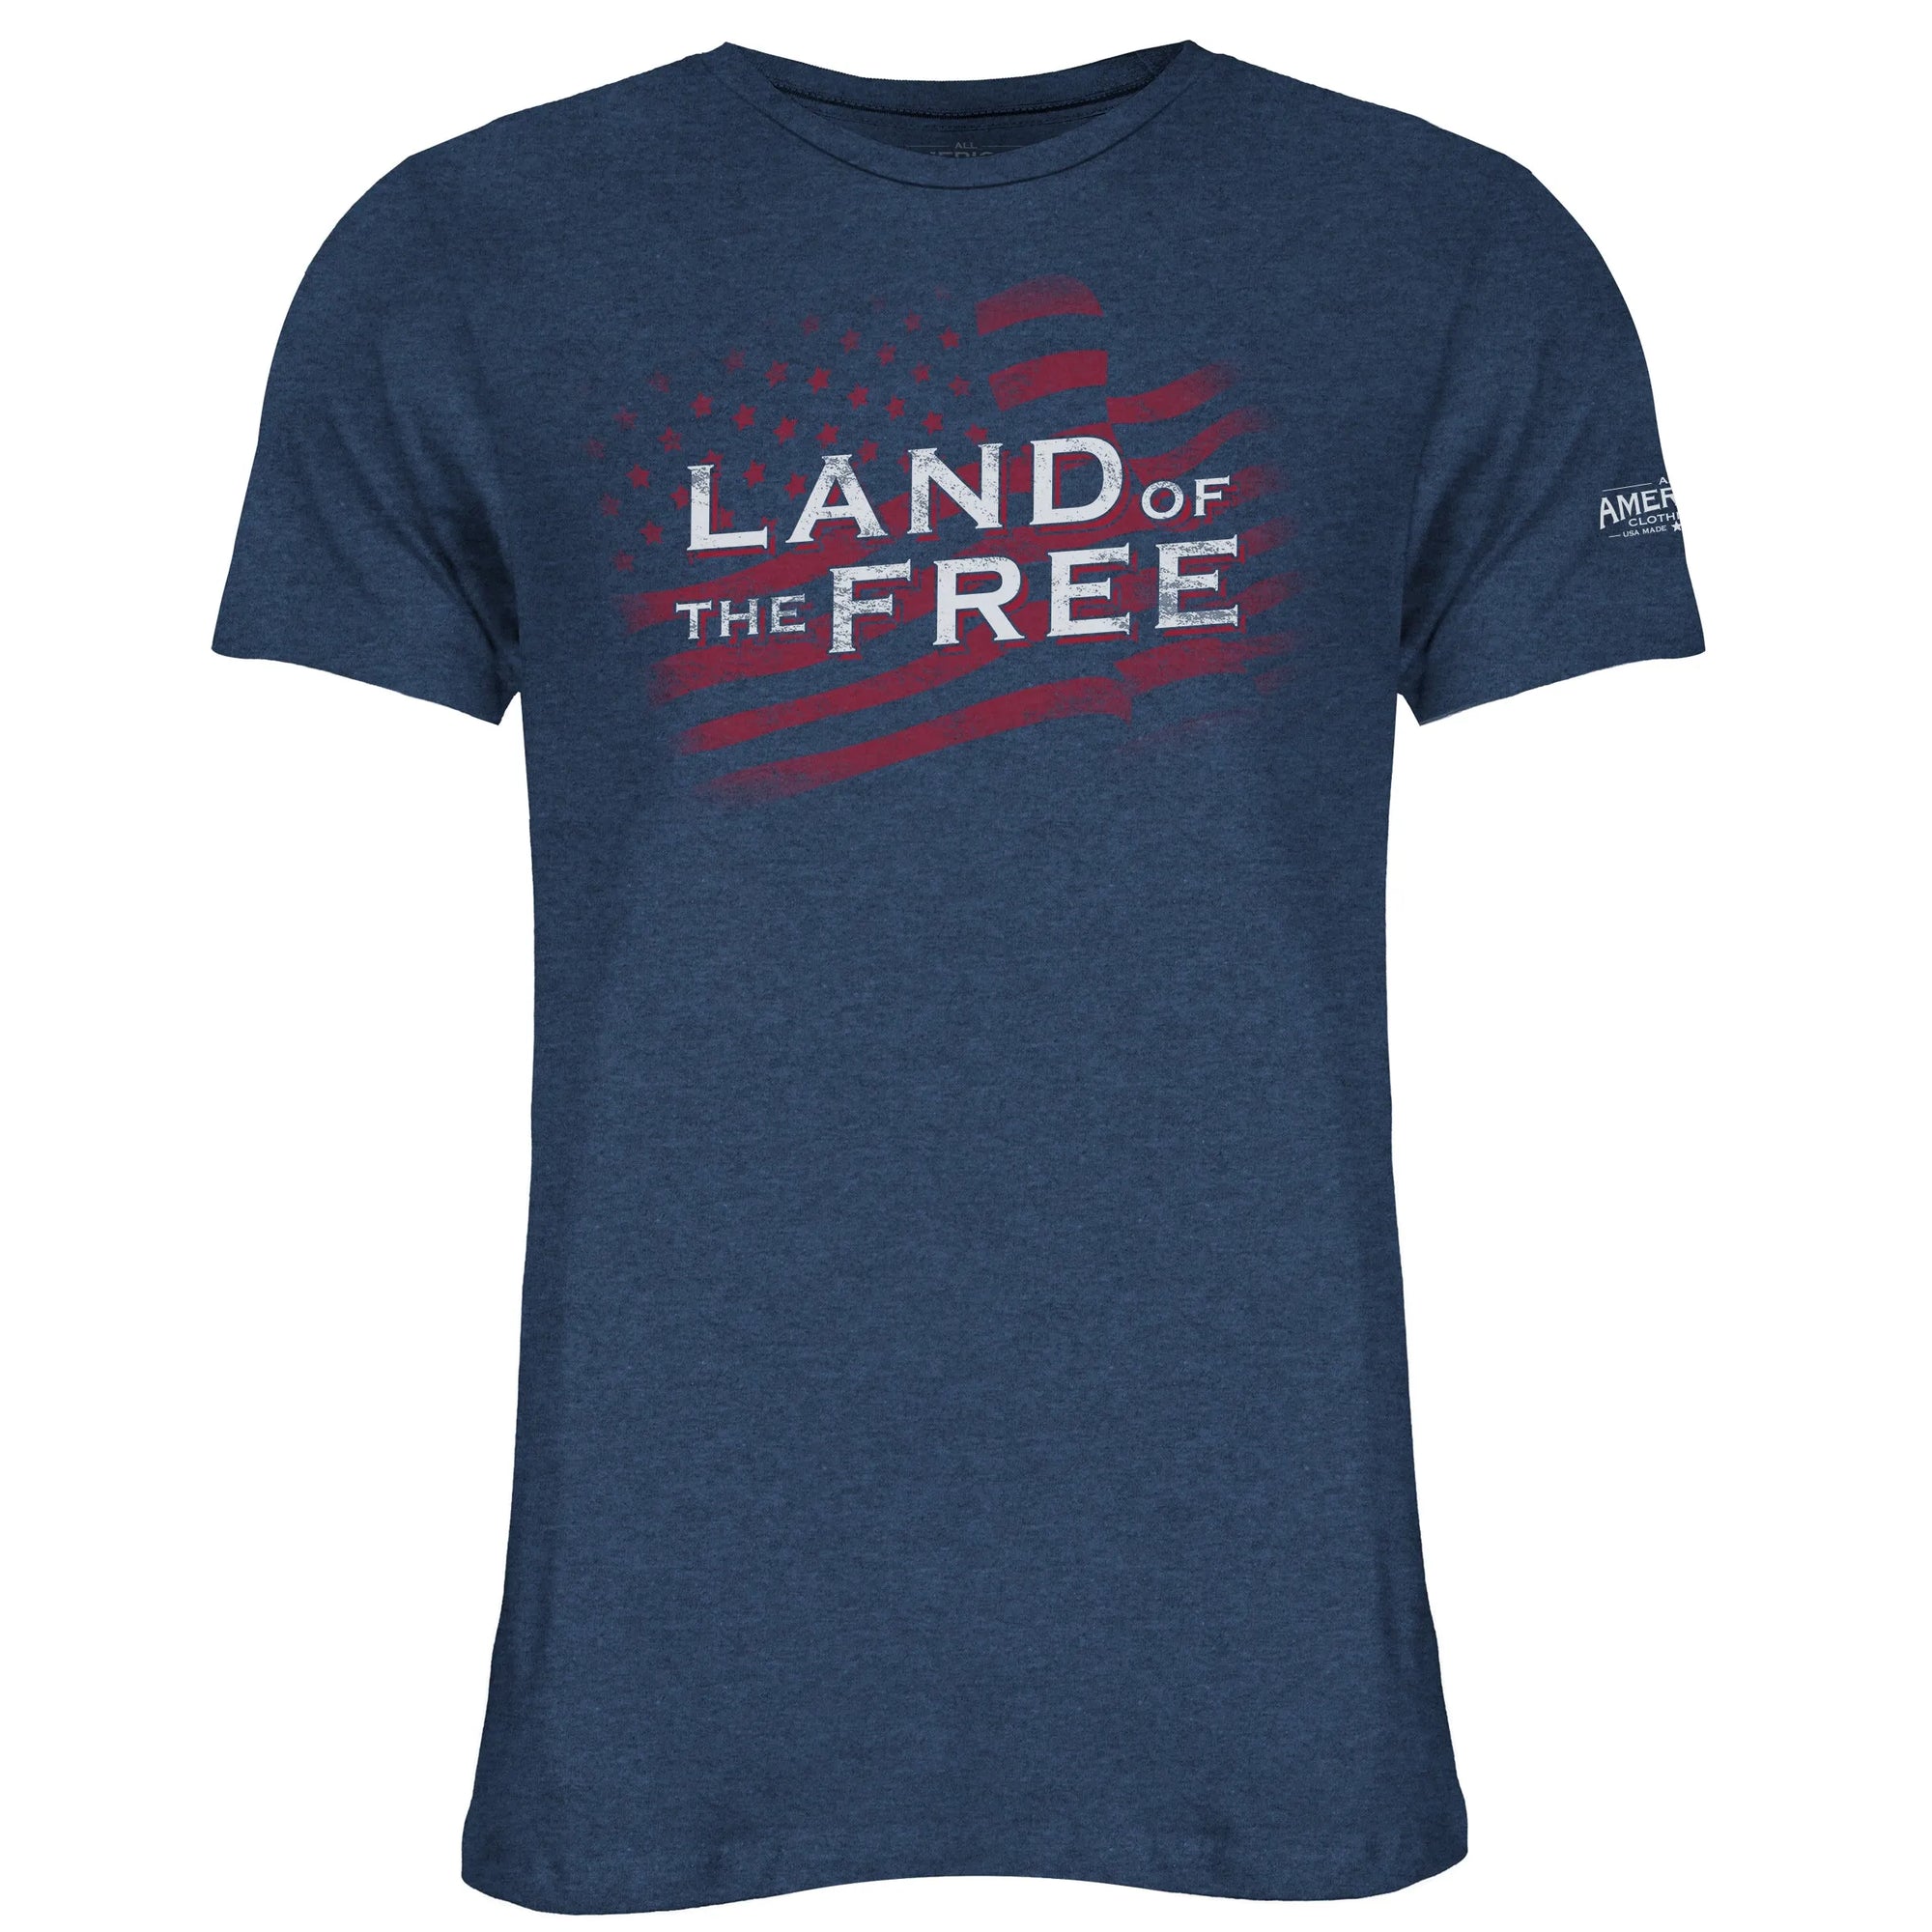 Flag Land of the Free Graphic T-Shirt All American Clothing Co